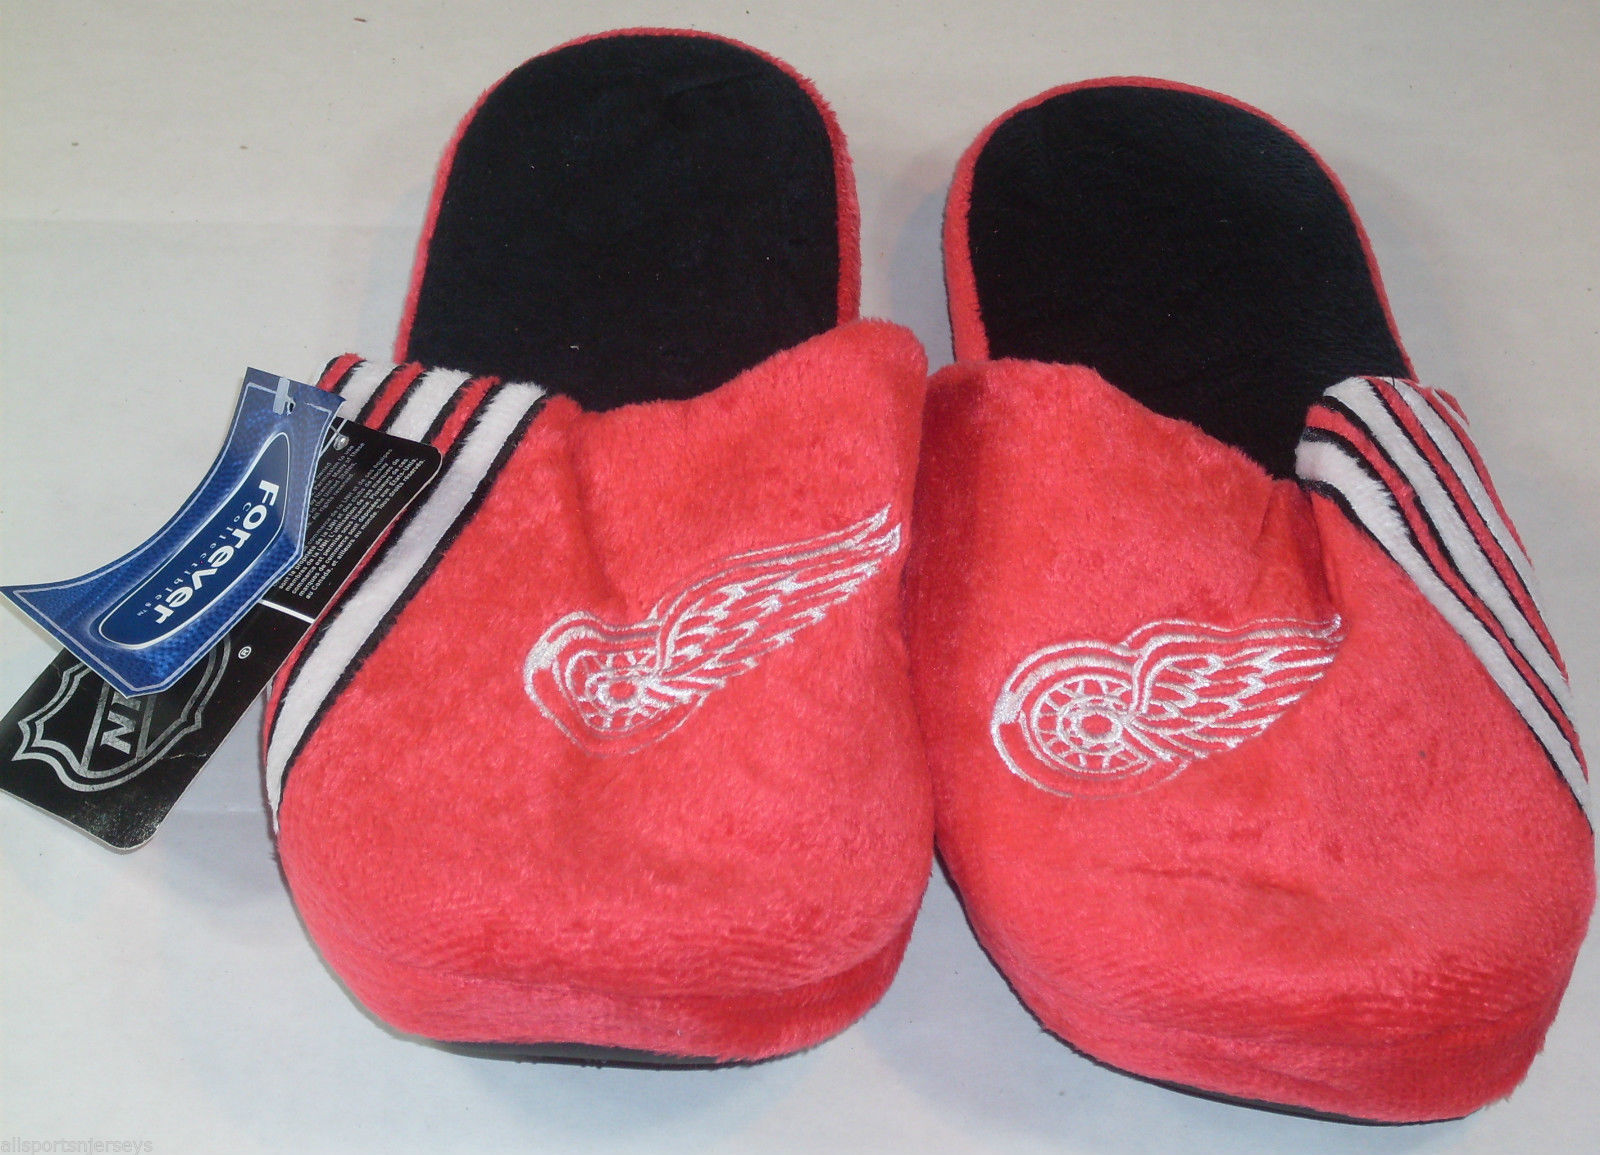 Primary image for NWT NHL STRIPE LOGO SLIDE SLIPPERS - DETROIT RED WINGS - LARGE